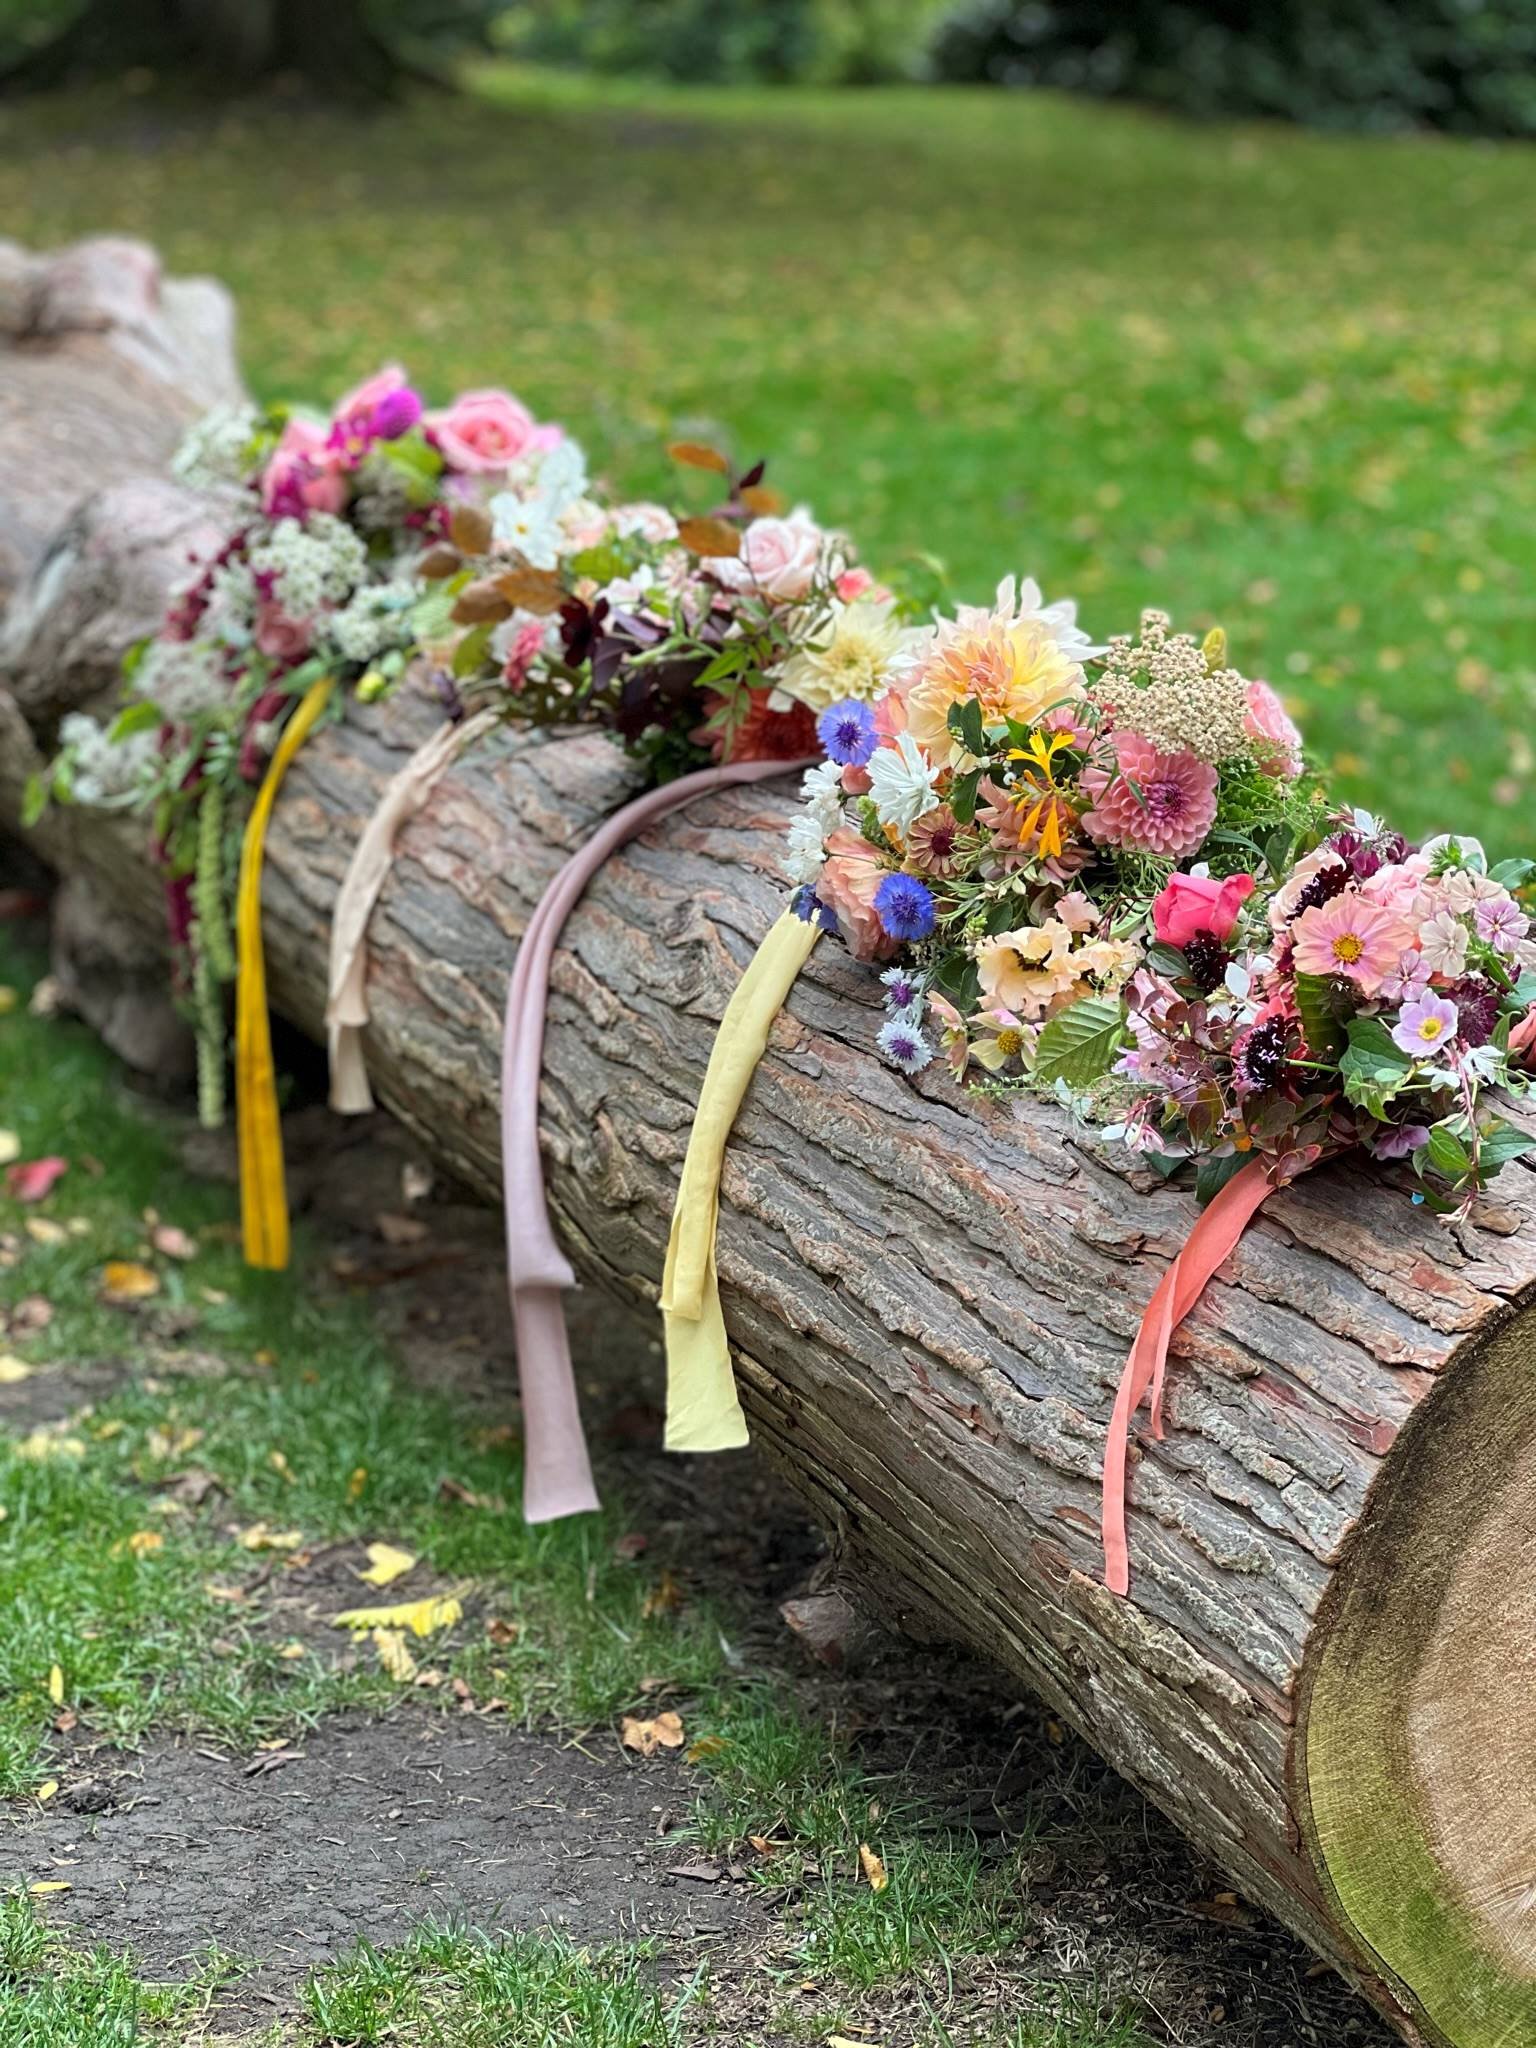 Students bridal bouquets lined on a wooden log in Bath's botanical garden